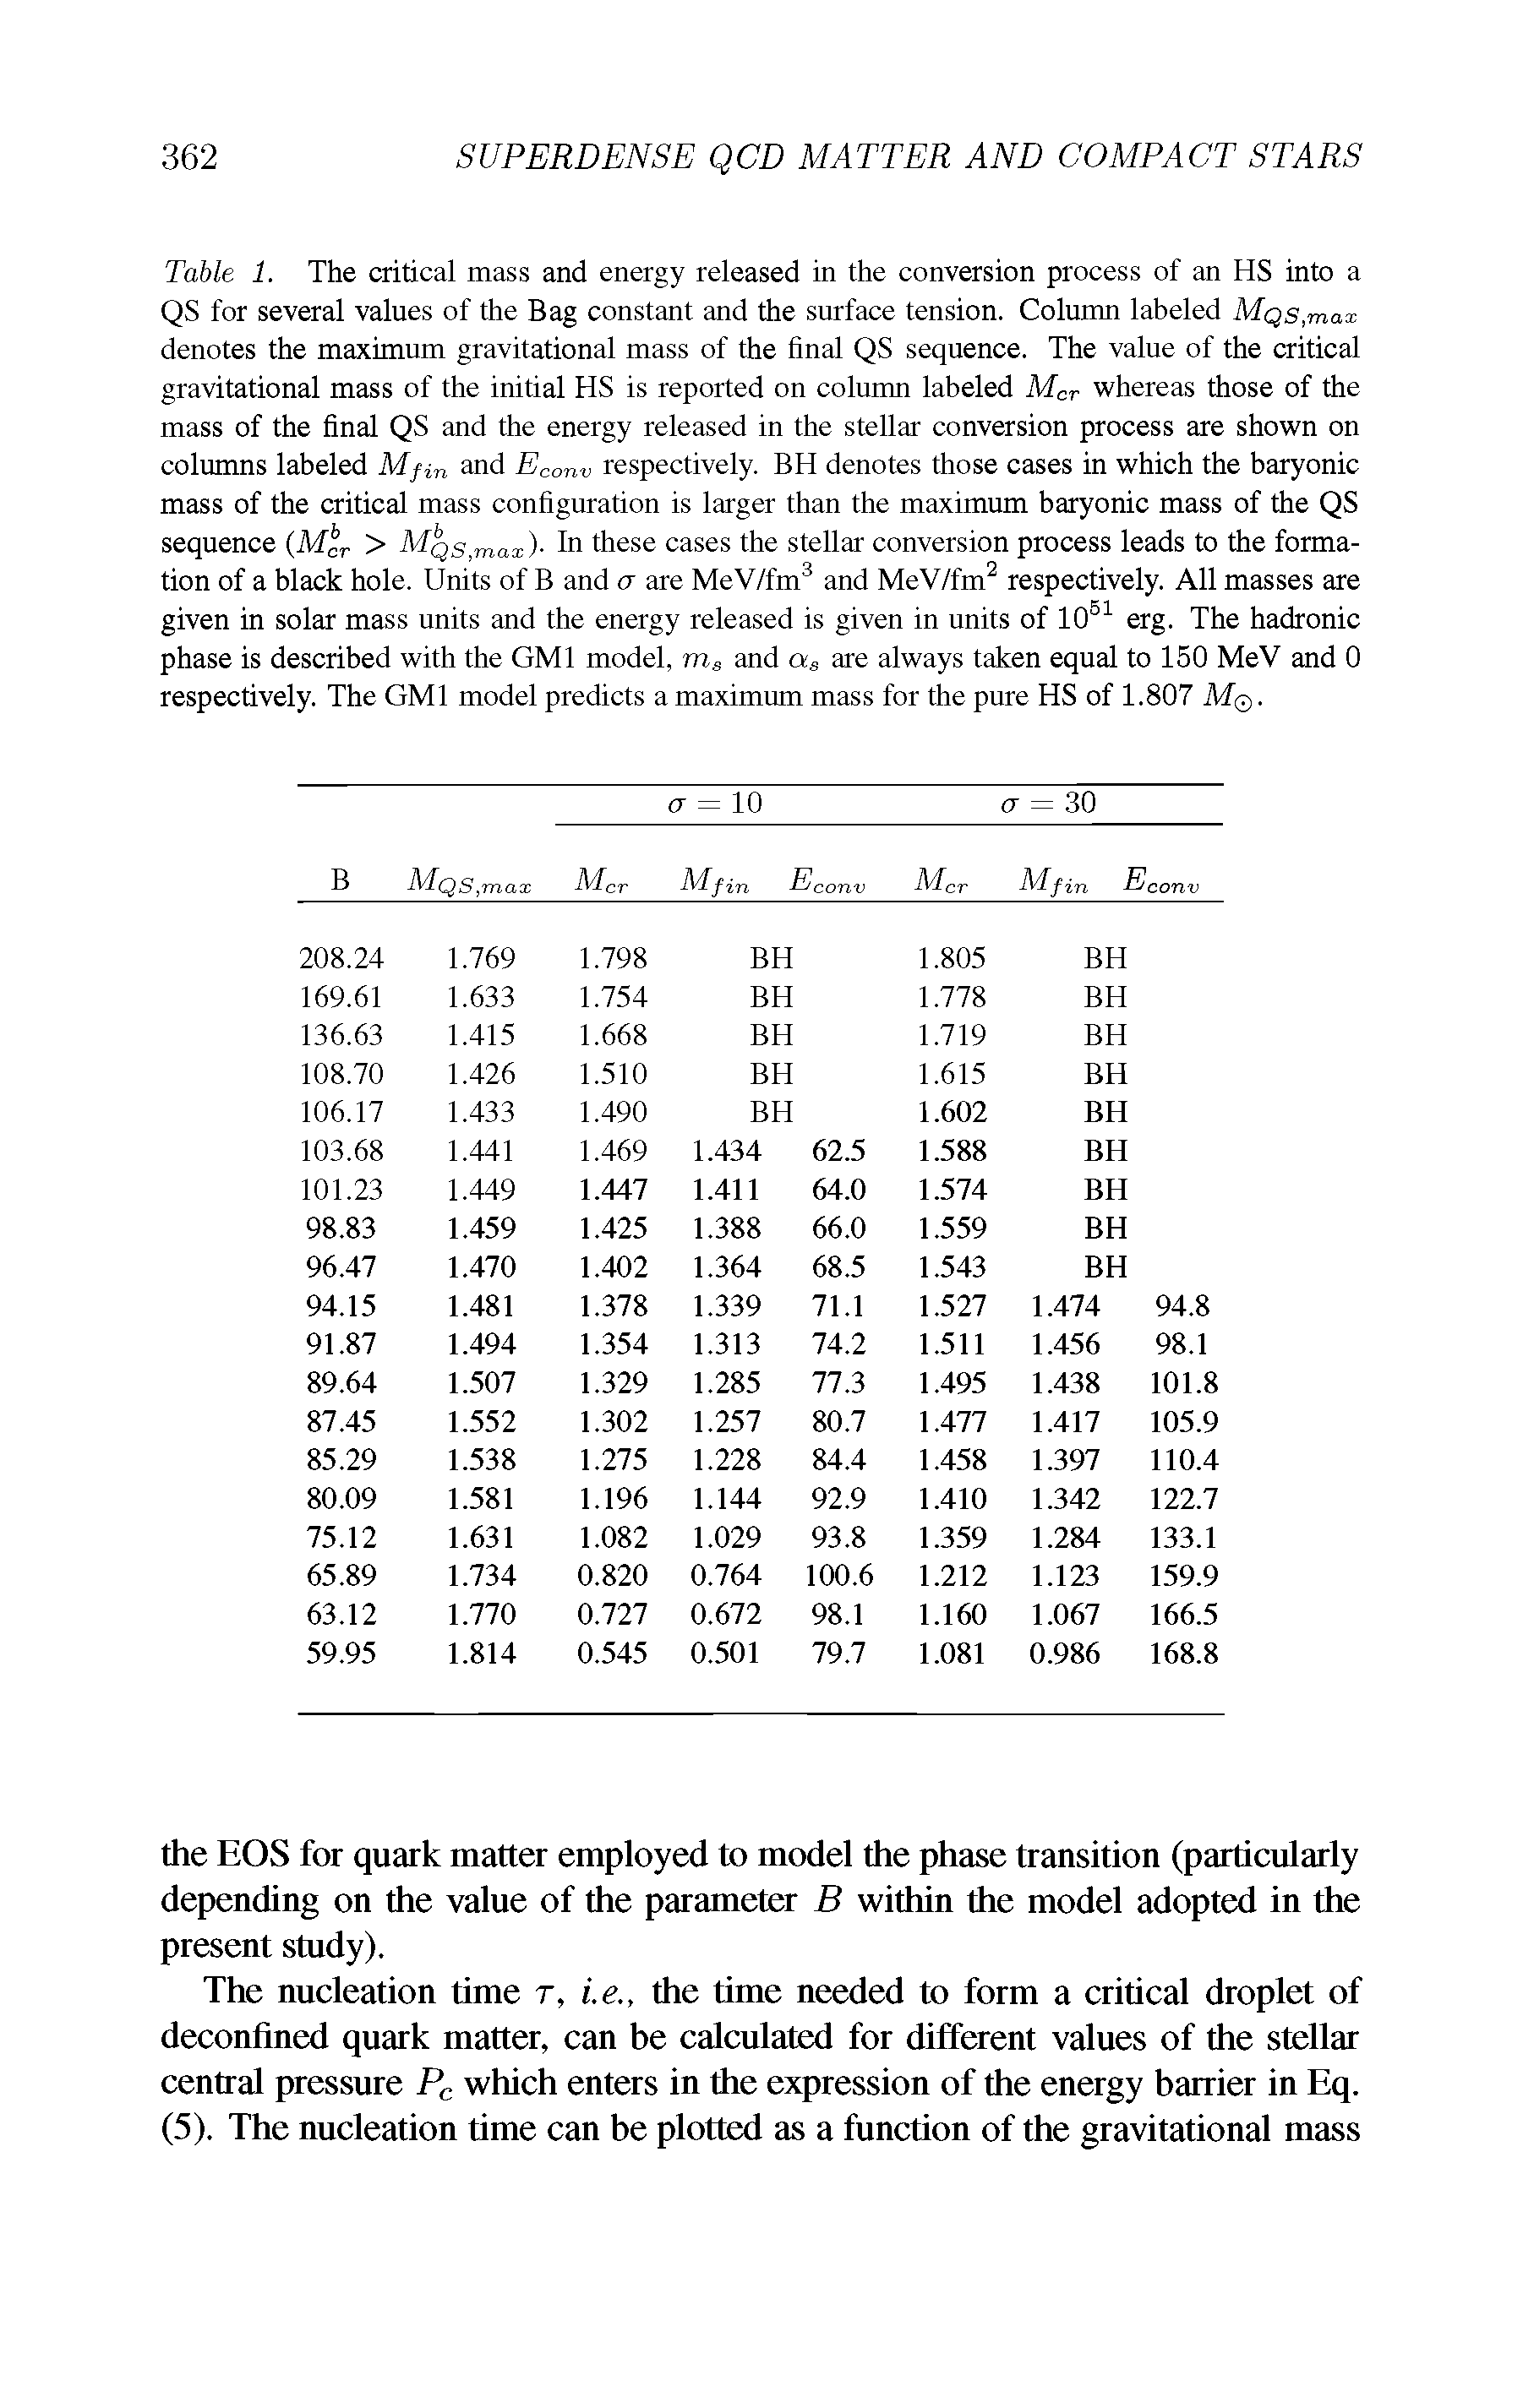 Table 1. The critical mass and energy released in the conversion process of an HS into a QS for several values of the Bag constant and the surface tension. Column labeled MQs,max denotes the maximum gravitational mass of the final QS sequence. The value of the critical gravitational mass of the initial HS is reported on column labeled Mcr whereas those of the mass of the final QS and the energy released in the stellar conversion process are shown on columns labeled Mfi and Econv respectively. BH denotes those cases in which the baryonic mass of the critical mass configuration is larger than the maximum baryonic mass of the QS sequence (M r > MQS>max). In these cases the stellar conversion process leads to the formation of a black hole. Units of B and a are MeV/fm3 and MeV/fm2 respectively. All masses are given in solar mass units and the energy released is given in units of 10B1 erg. The hadronic phase is described with the GM1 model, ms and as are always taken equal to 150 MeV and 0 respectively. The GM1 model predicts a maximum mass for the pure HS of 1.807 M .